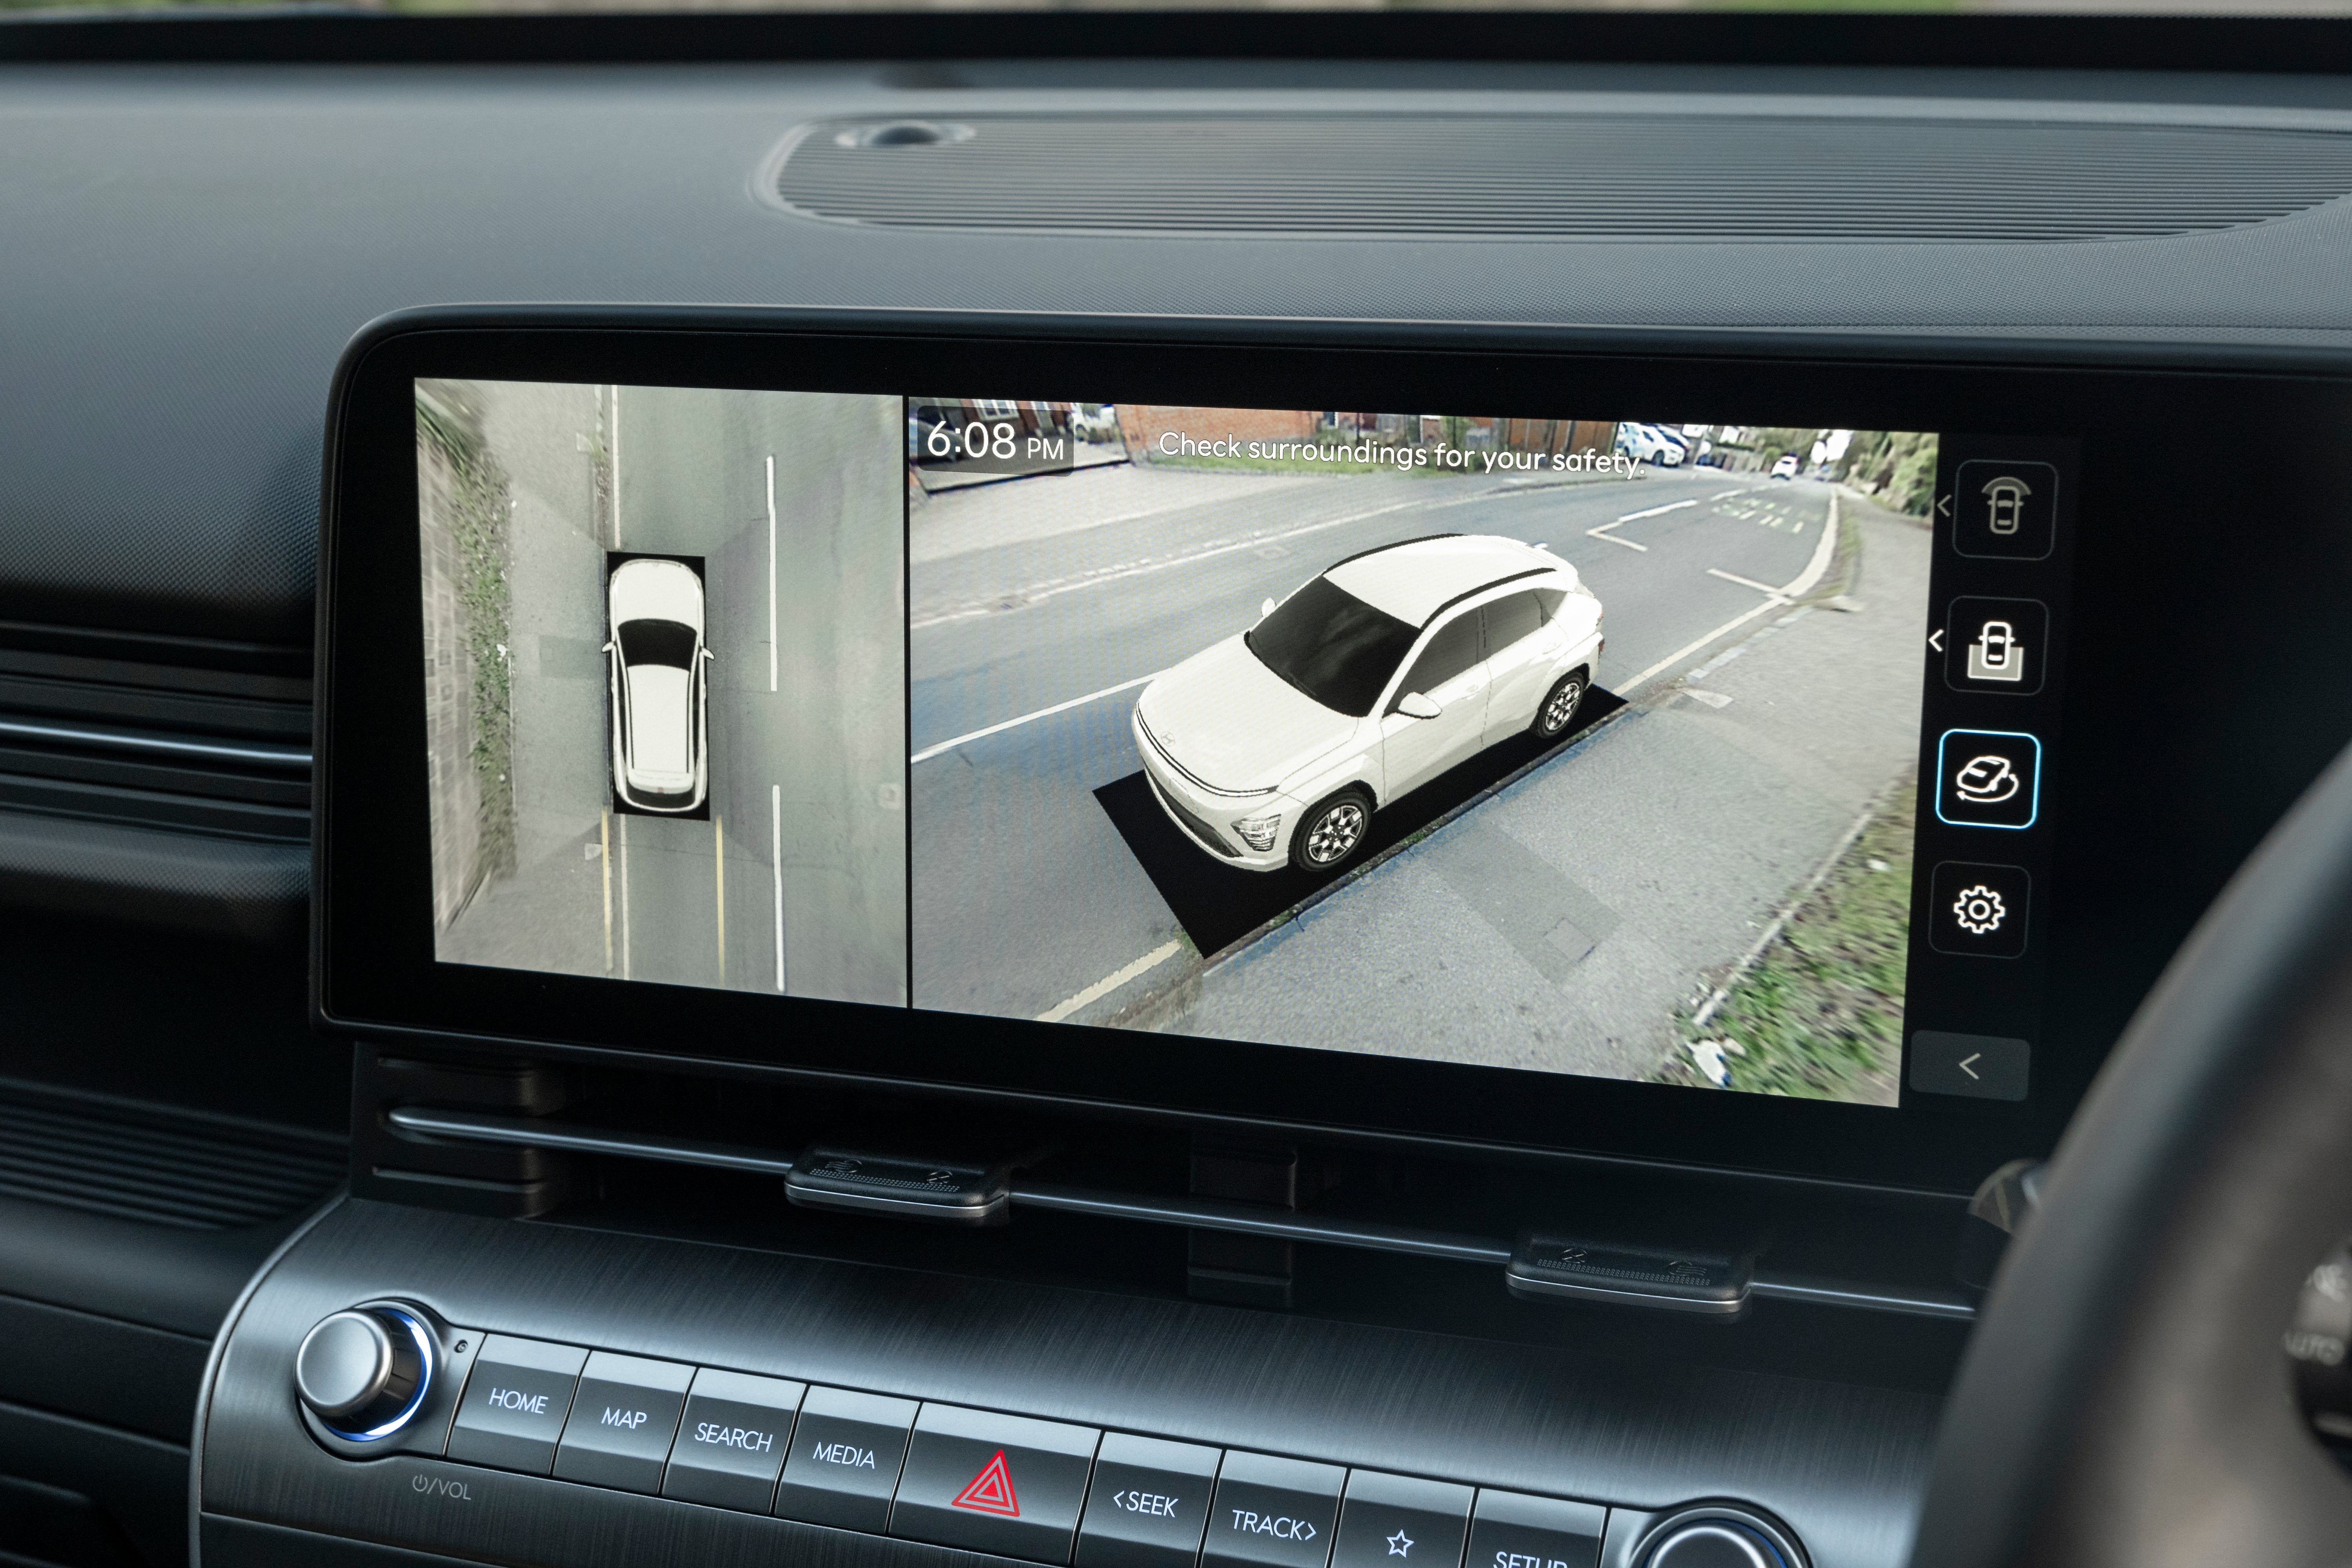 There is easy access to infotainment, navigation, as well as smartphone mirroring